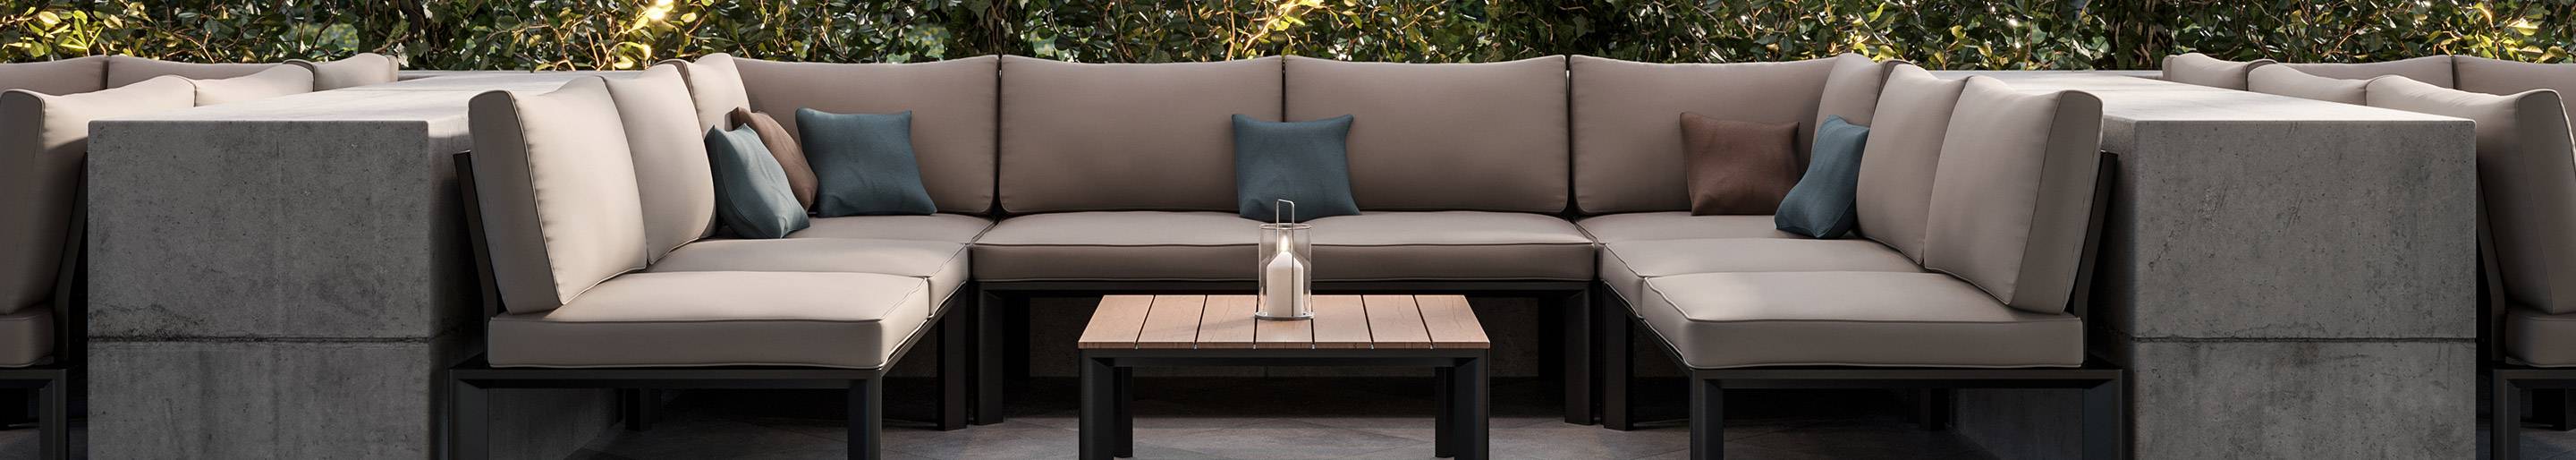 Outdoor furniture by category